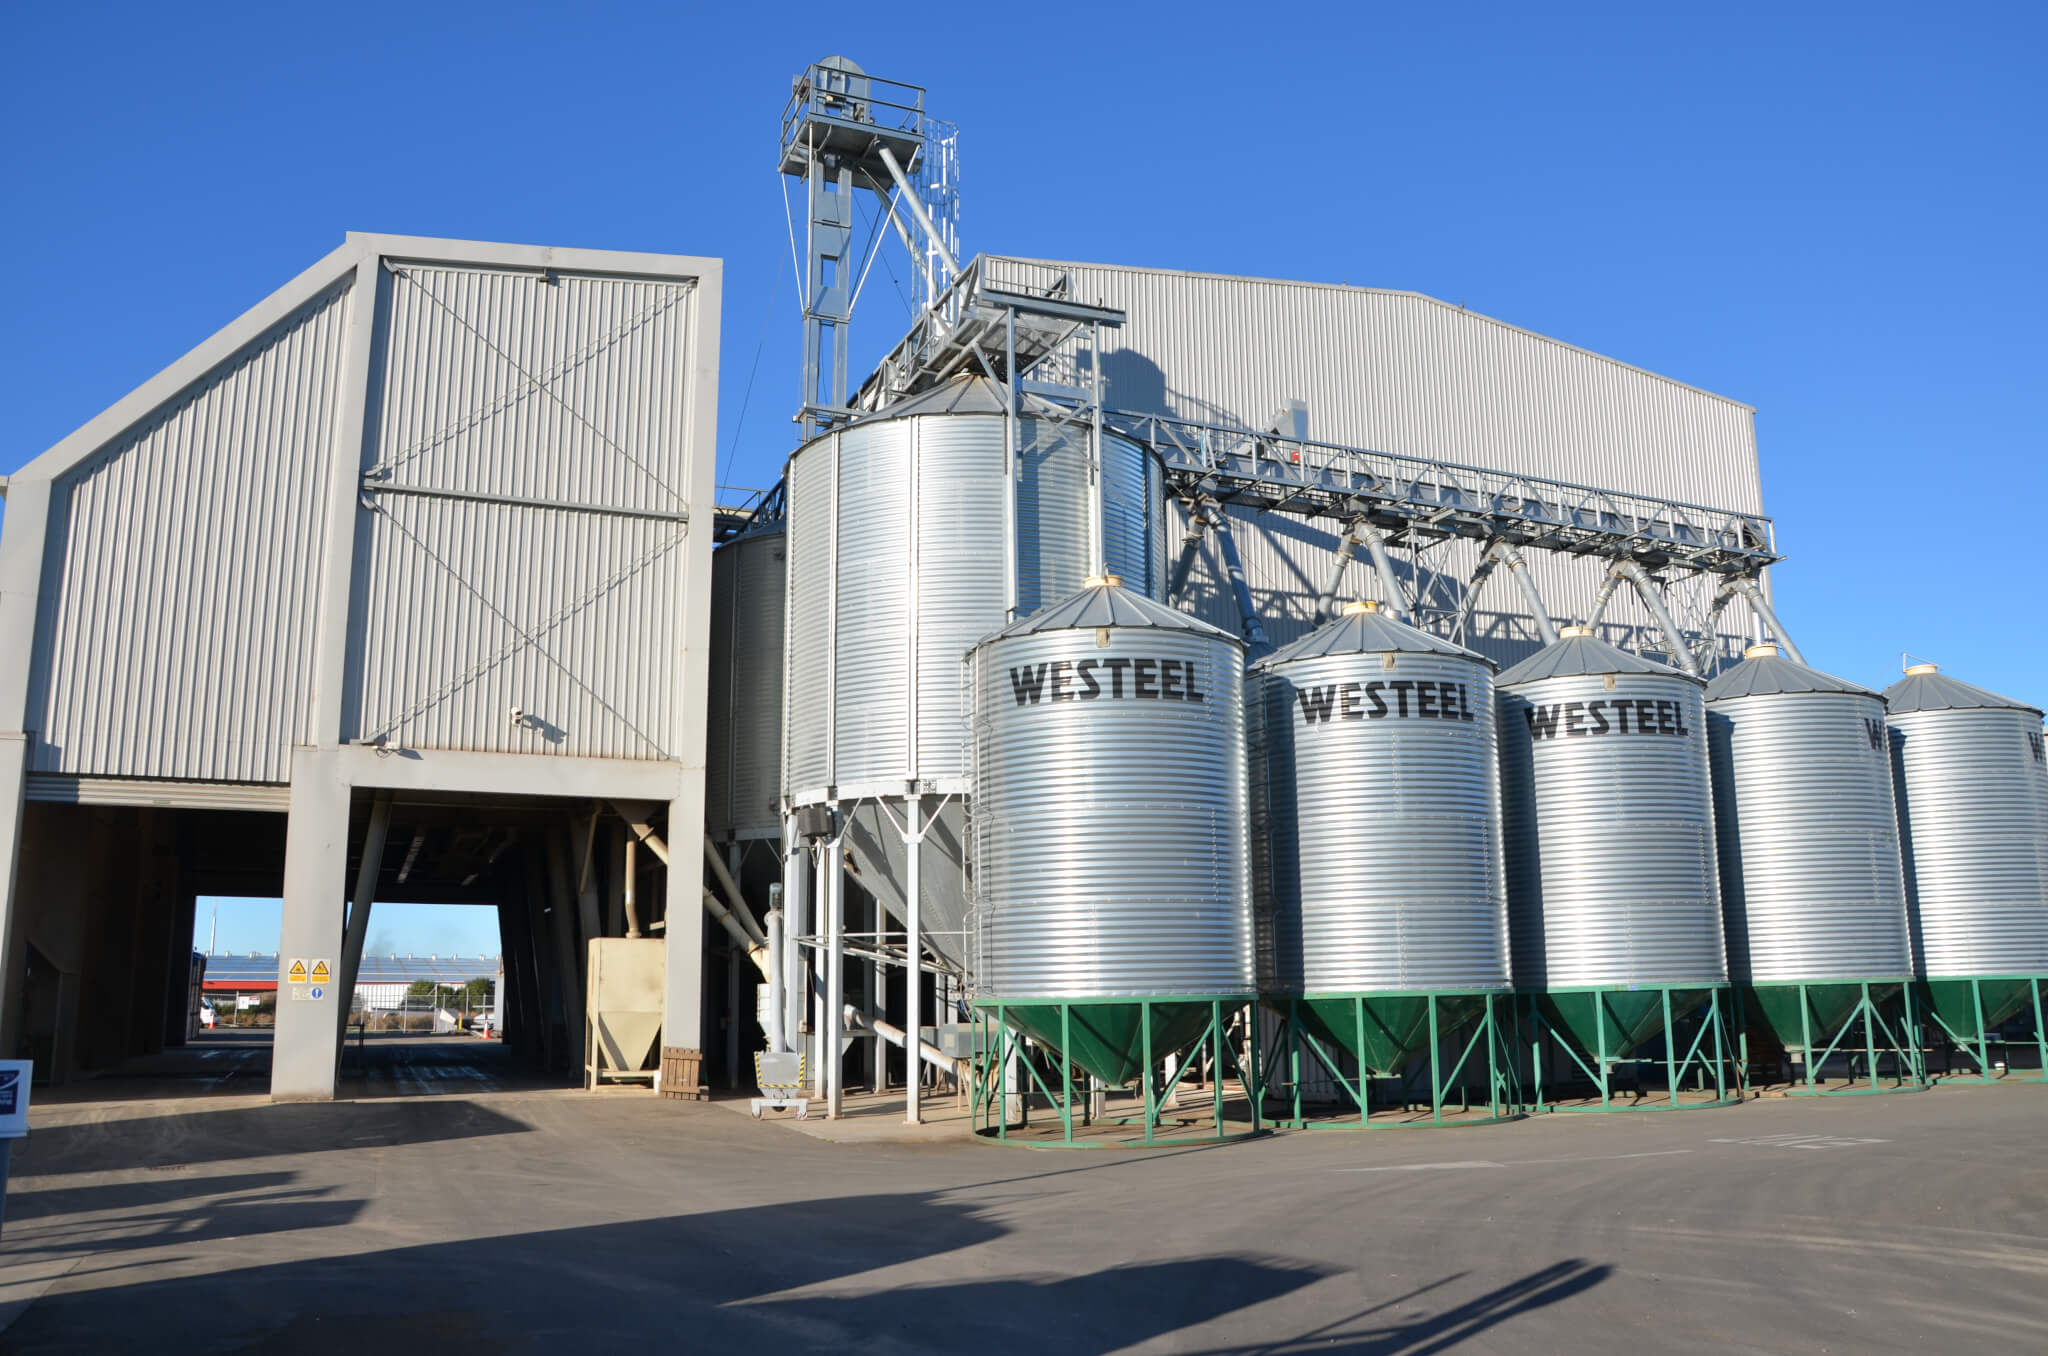 Annual Cleaning Of Silos A Must Do Nrm Feed To Succeed intended for proportions 2048 X 1356